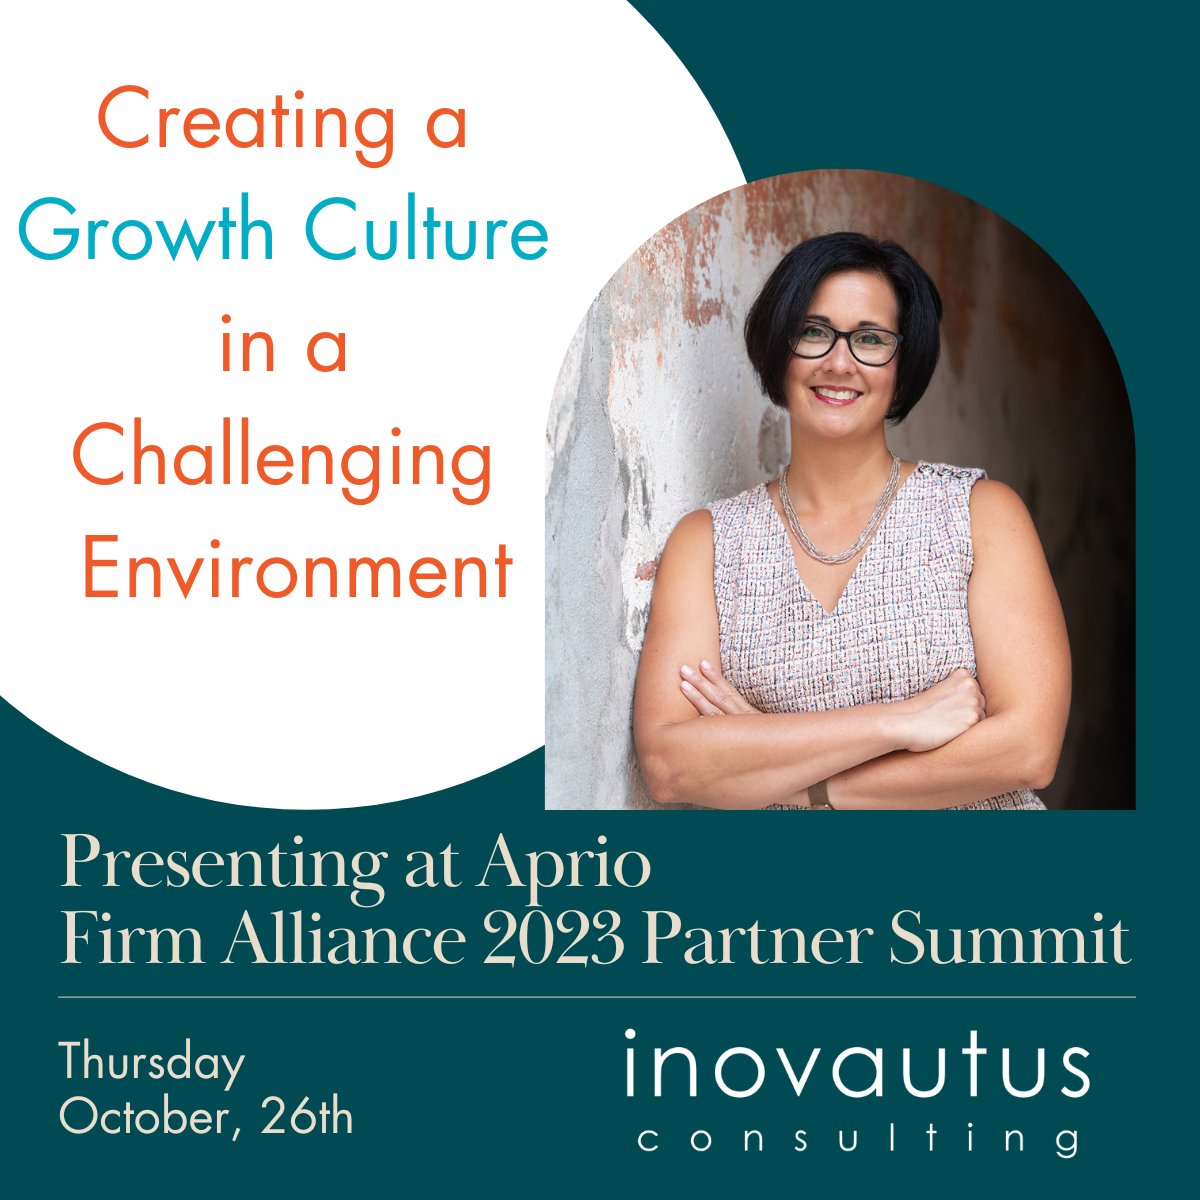 Are you attending Aprio's Firm Alliance 2023 Partner Summit in Salt Lake City next week? Make sure to save a spot in your schedule to catch an insightful session by Sarah Dobek! 🌱 Plus, the presentation awards CPE credit! 🏆 #AprioSummit2023 #GrowthCulture